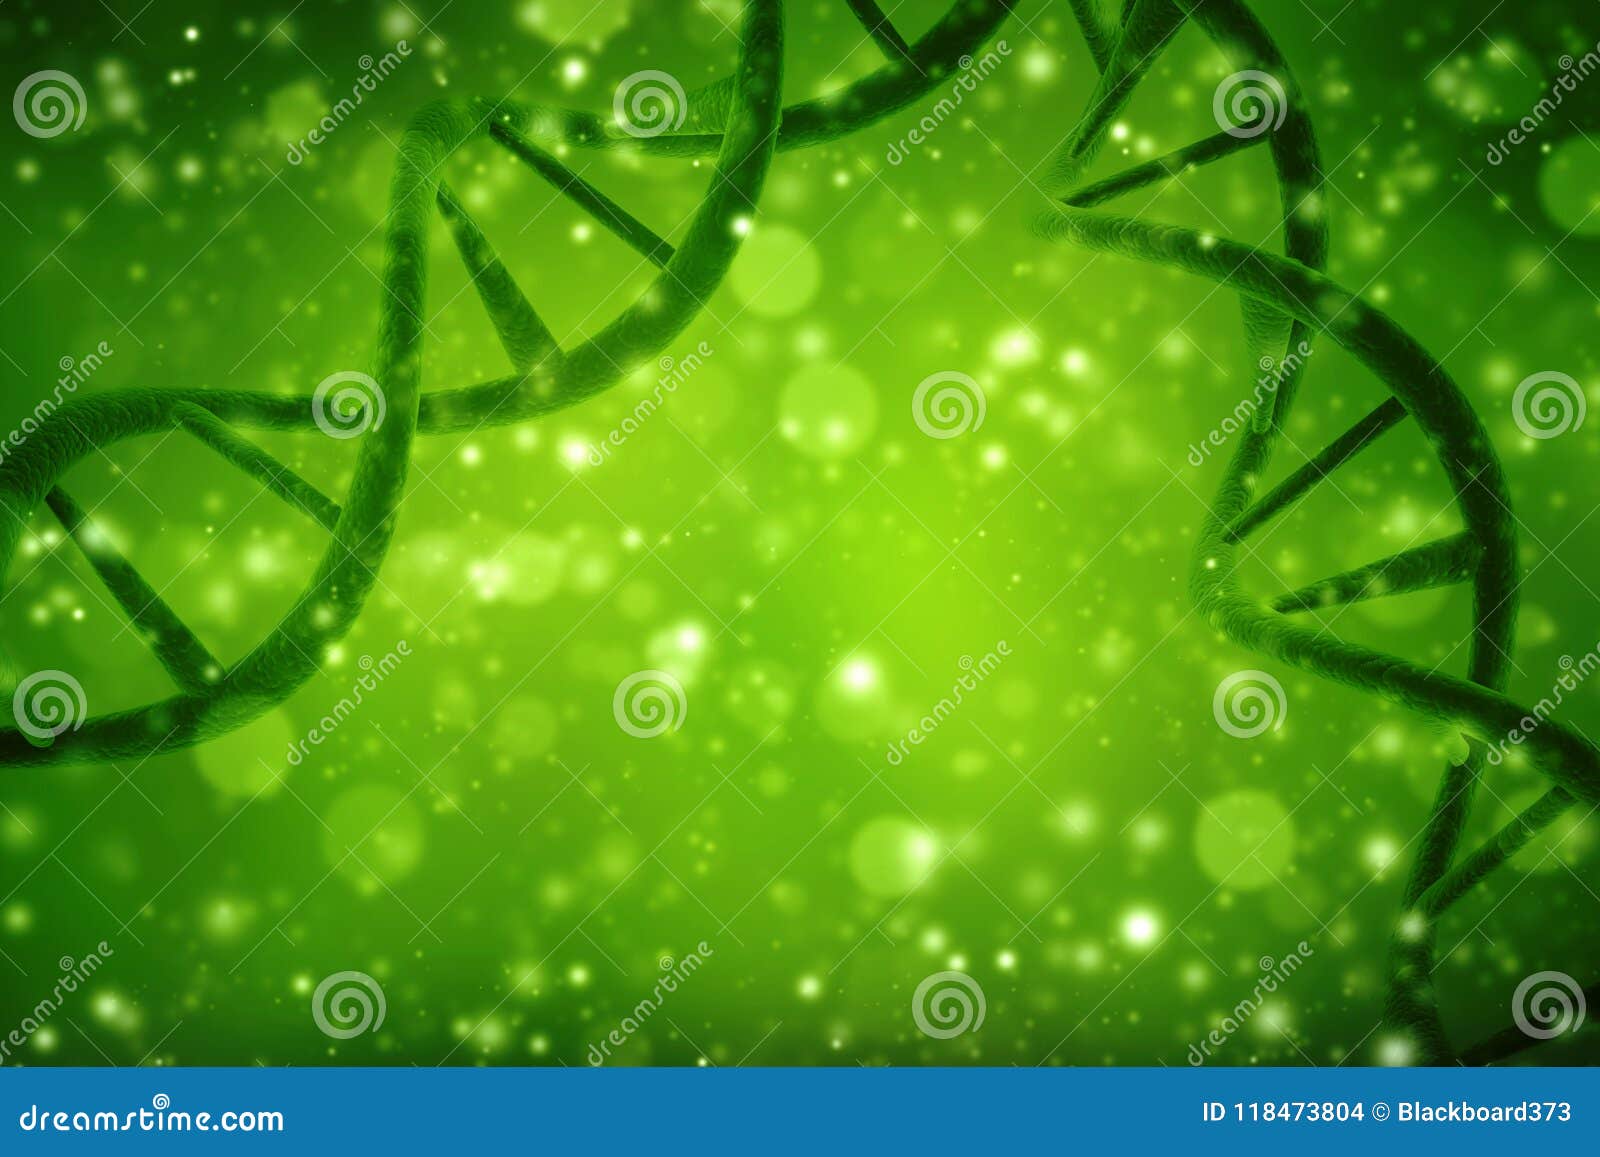 concept of biochemistry with dna molecule in medical abstract background. 3d rendering